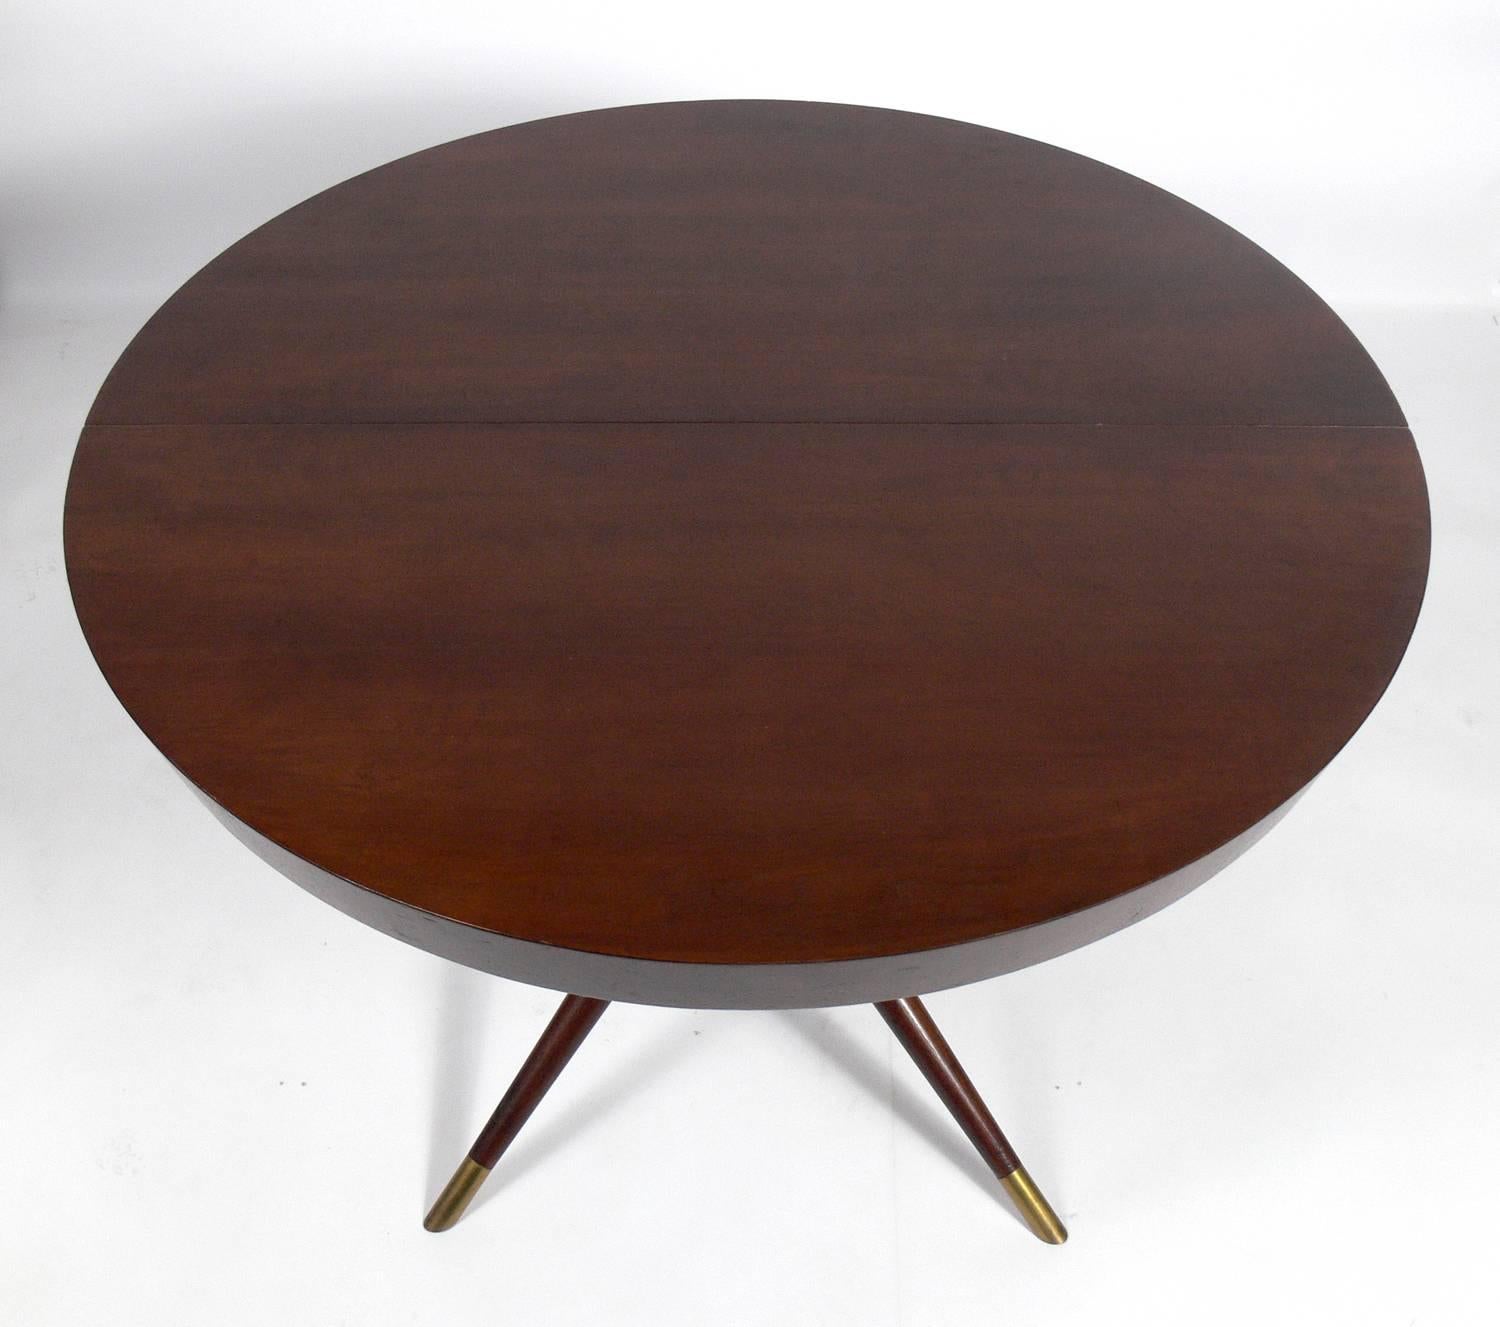 Incredible Italian dining table, circa 1950s. This table expands from it's round shape, seating to four to six people, to a large oval to accommodate up to ten guests. With it's three leaves installed it measures an impressive 98